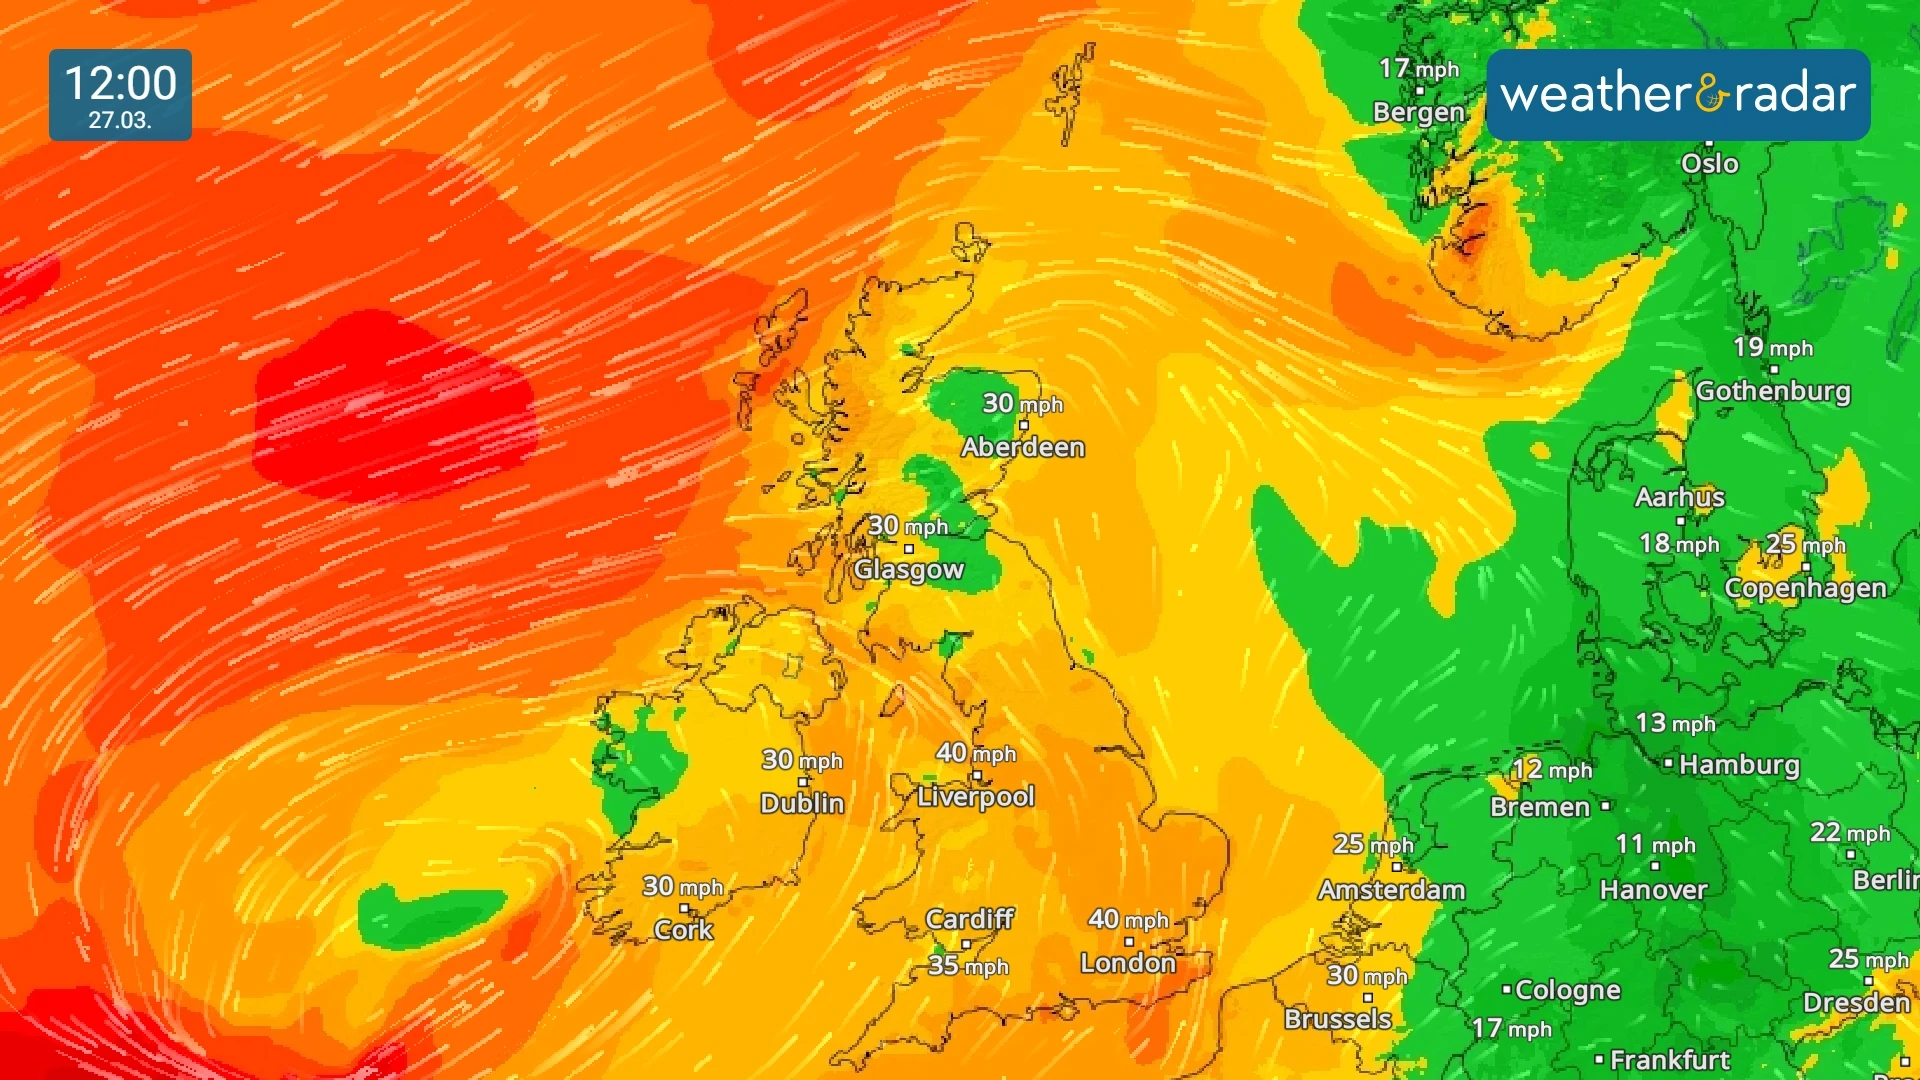 Winds gusting in excess of 40 mph in places.